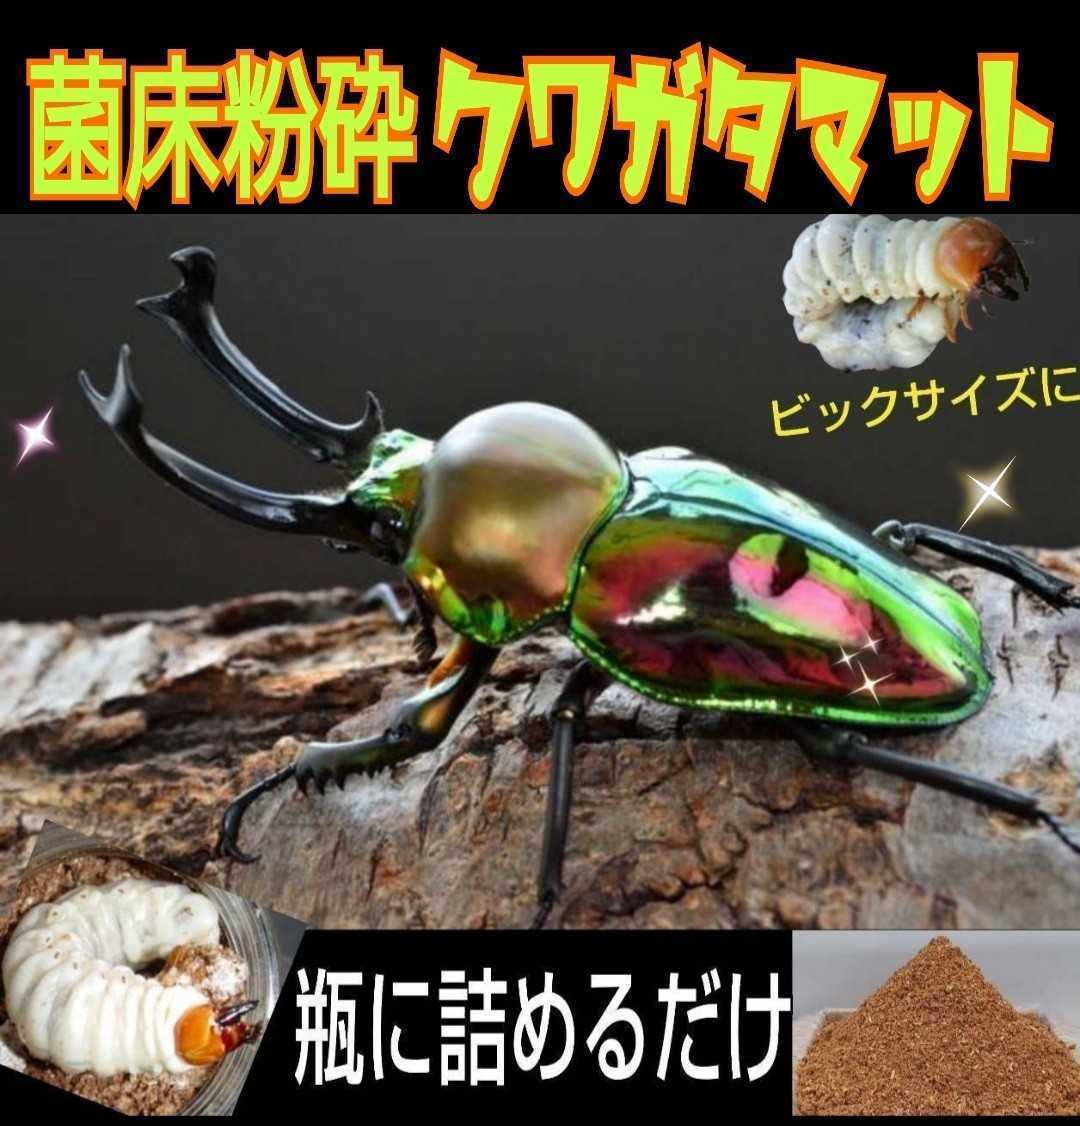  improvement version!. floor crushing oo stag beetle mat [20L] bin .... only! common ta,nijiiro, saw also! the first . from feather . till OK!. thread. .. fragrance 